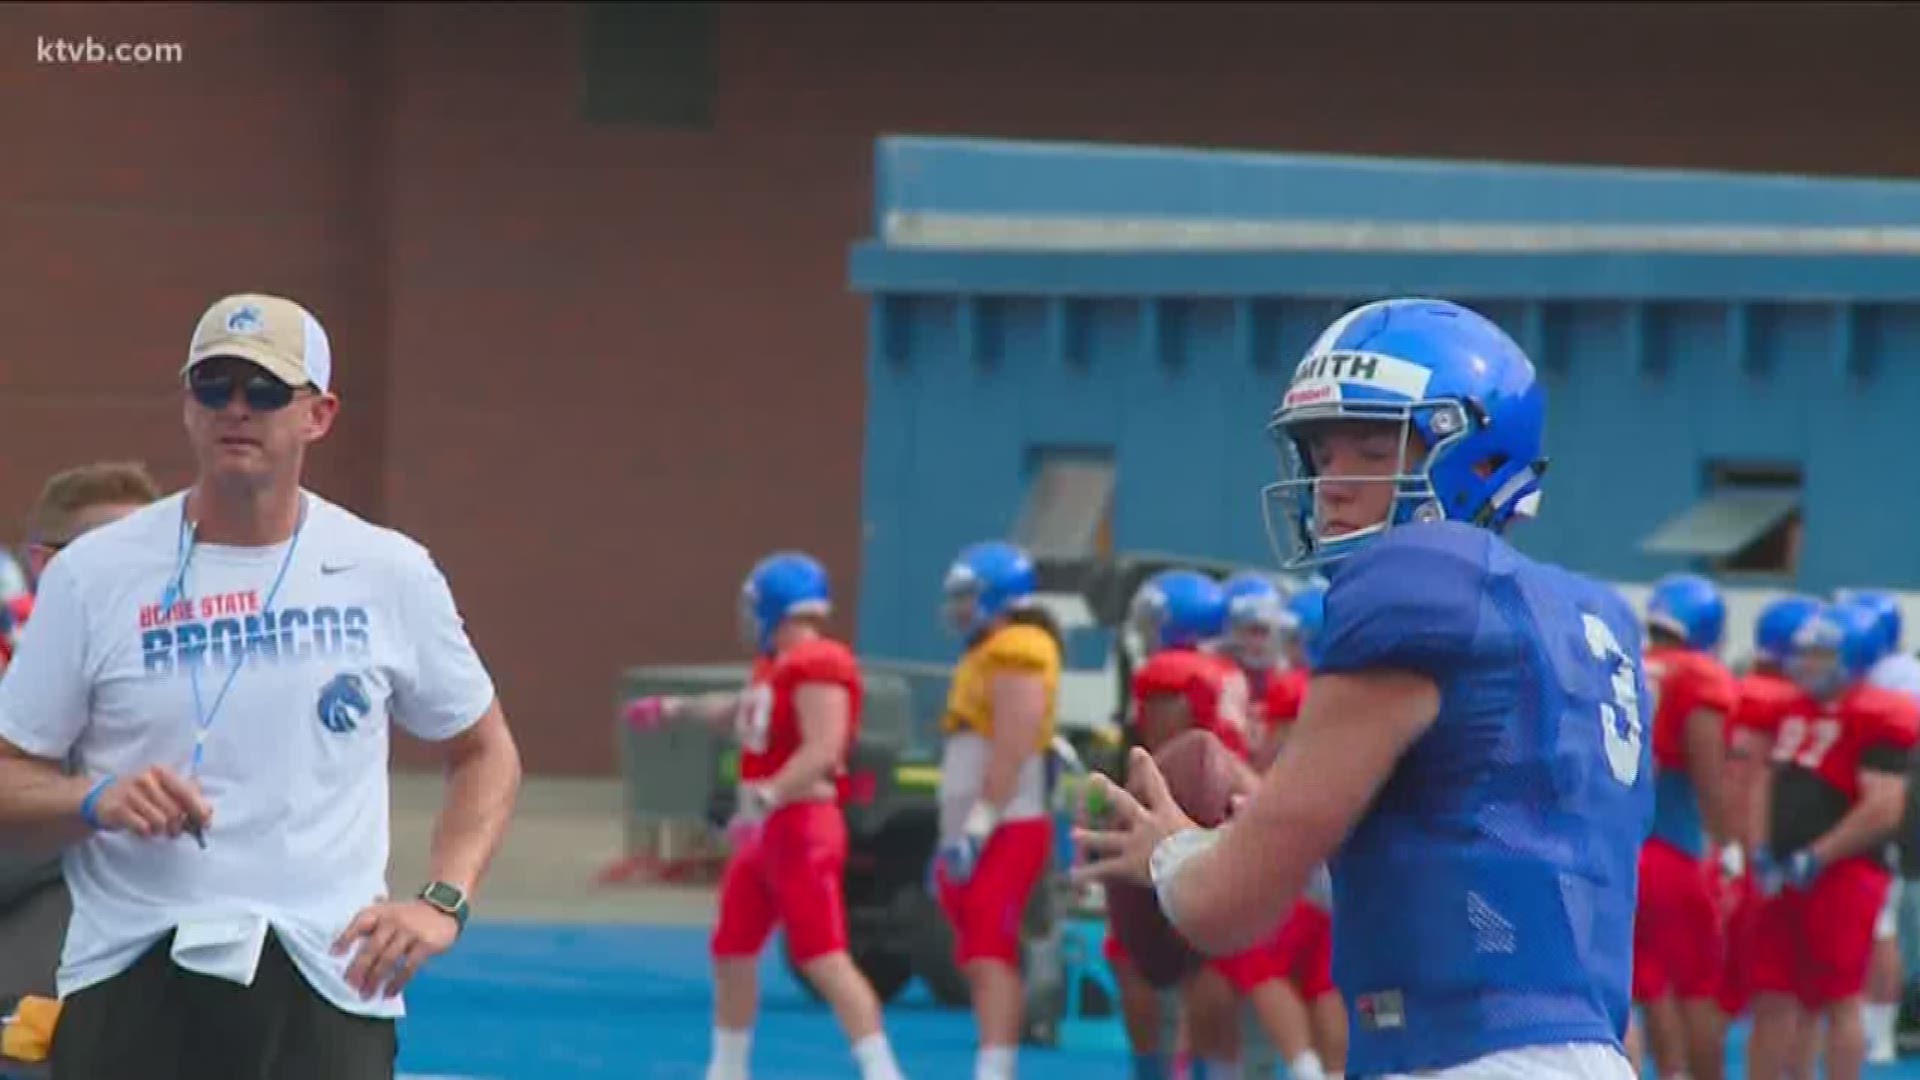 KTVB's Jay Tust and Will Hall breakdown key positions battles, news from fall camp, and the preseason outlook for the Boise State Broncos. This Bronco Roundup Gameday Preseason Special has everything that you need to know before the Broncos start the 2019 football season.